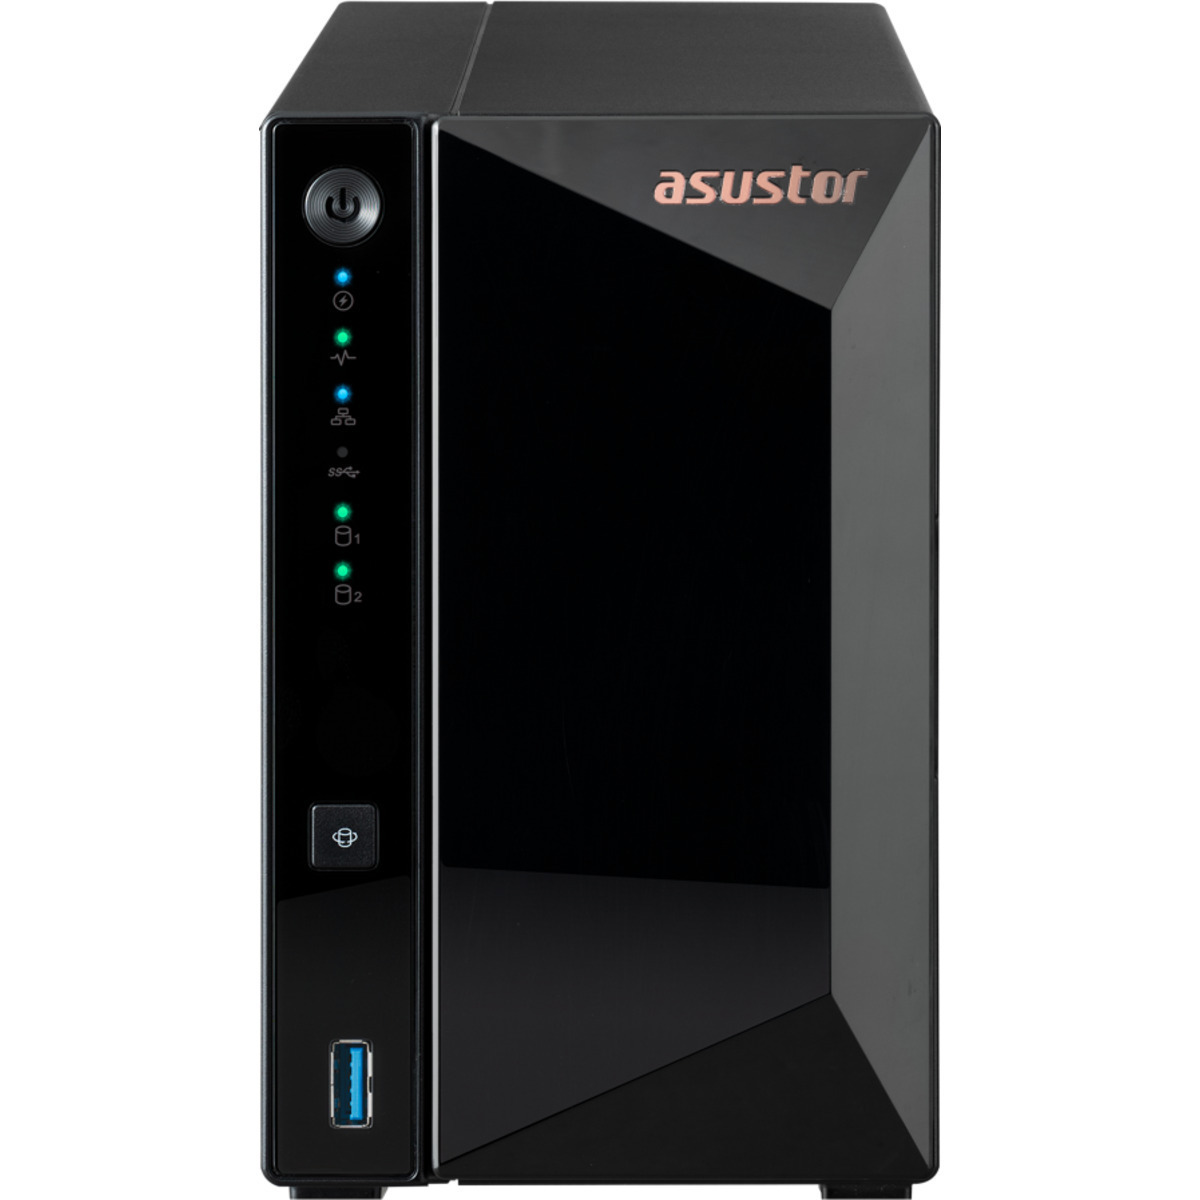 ASUSTOR DRIVESTOR 2 Pro AS3302T 4tb 2-Bay Desktop Personal / Basic Home / Small Office NAS - Network Attached Storage Device 1x4tb Western Digital Blue WD40EZRZ 3.5 5400rpm SATA 6Gb/s HDD CONSUMER Class Drives Installed - Burn-In Tested DRIVESTOR 2 Pro AS3302T